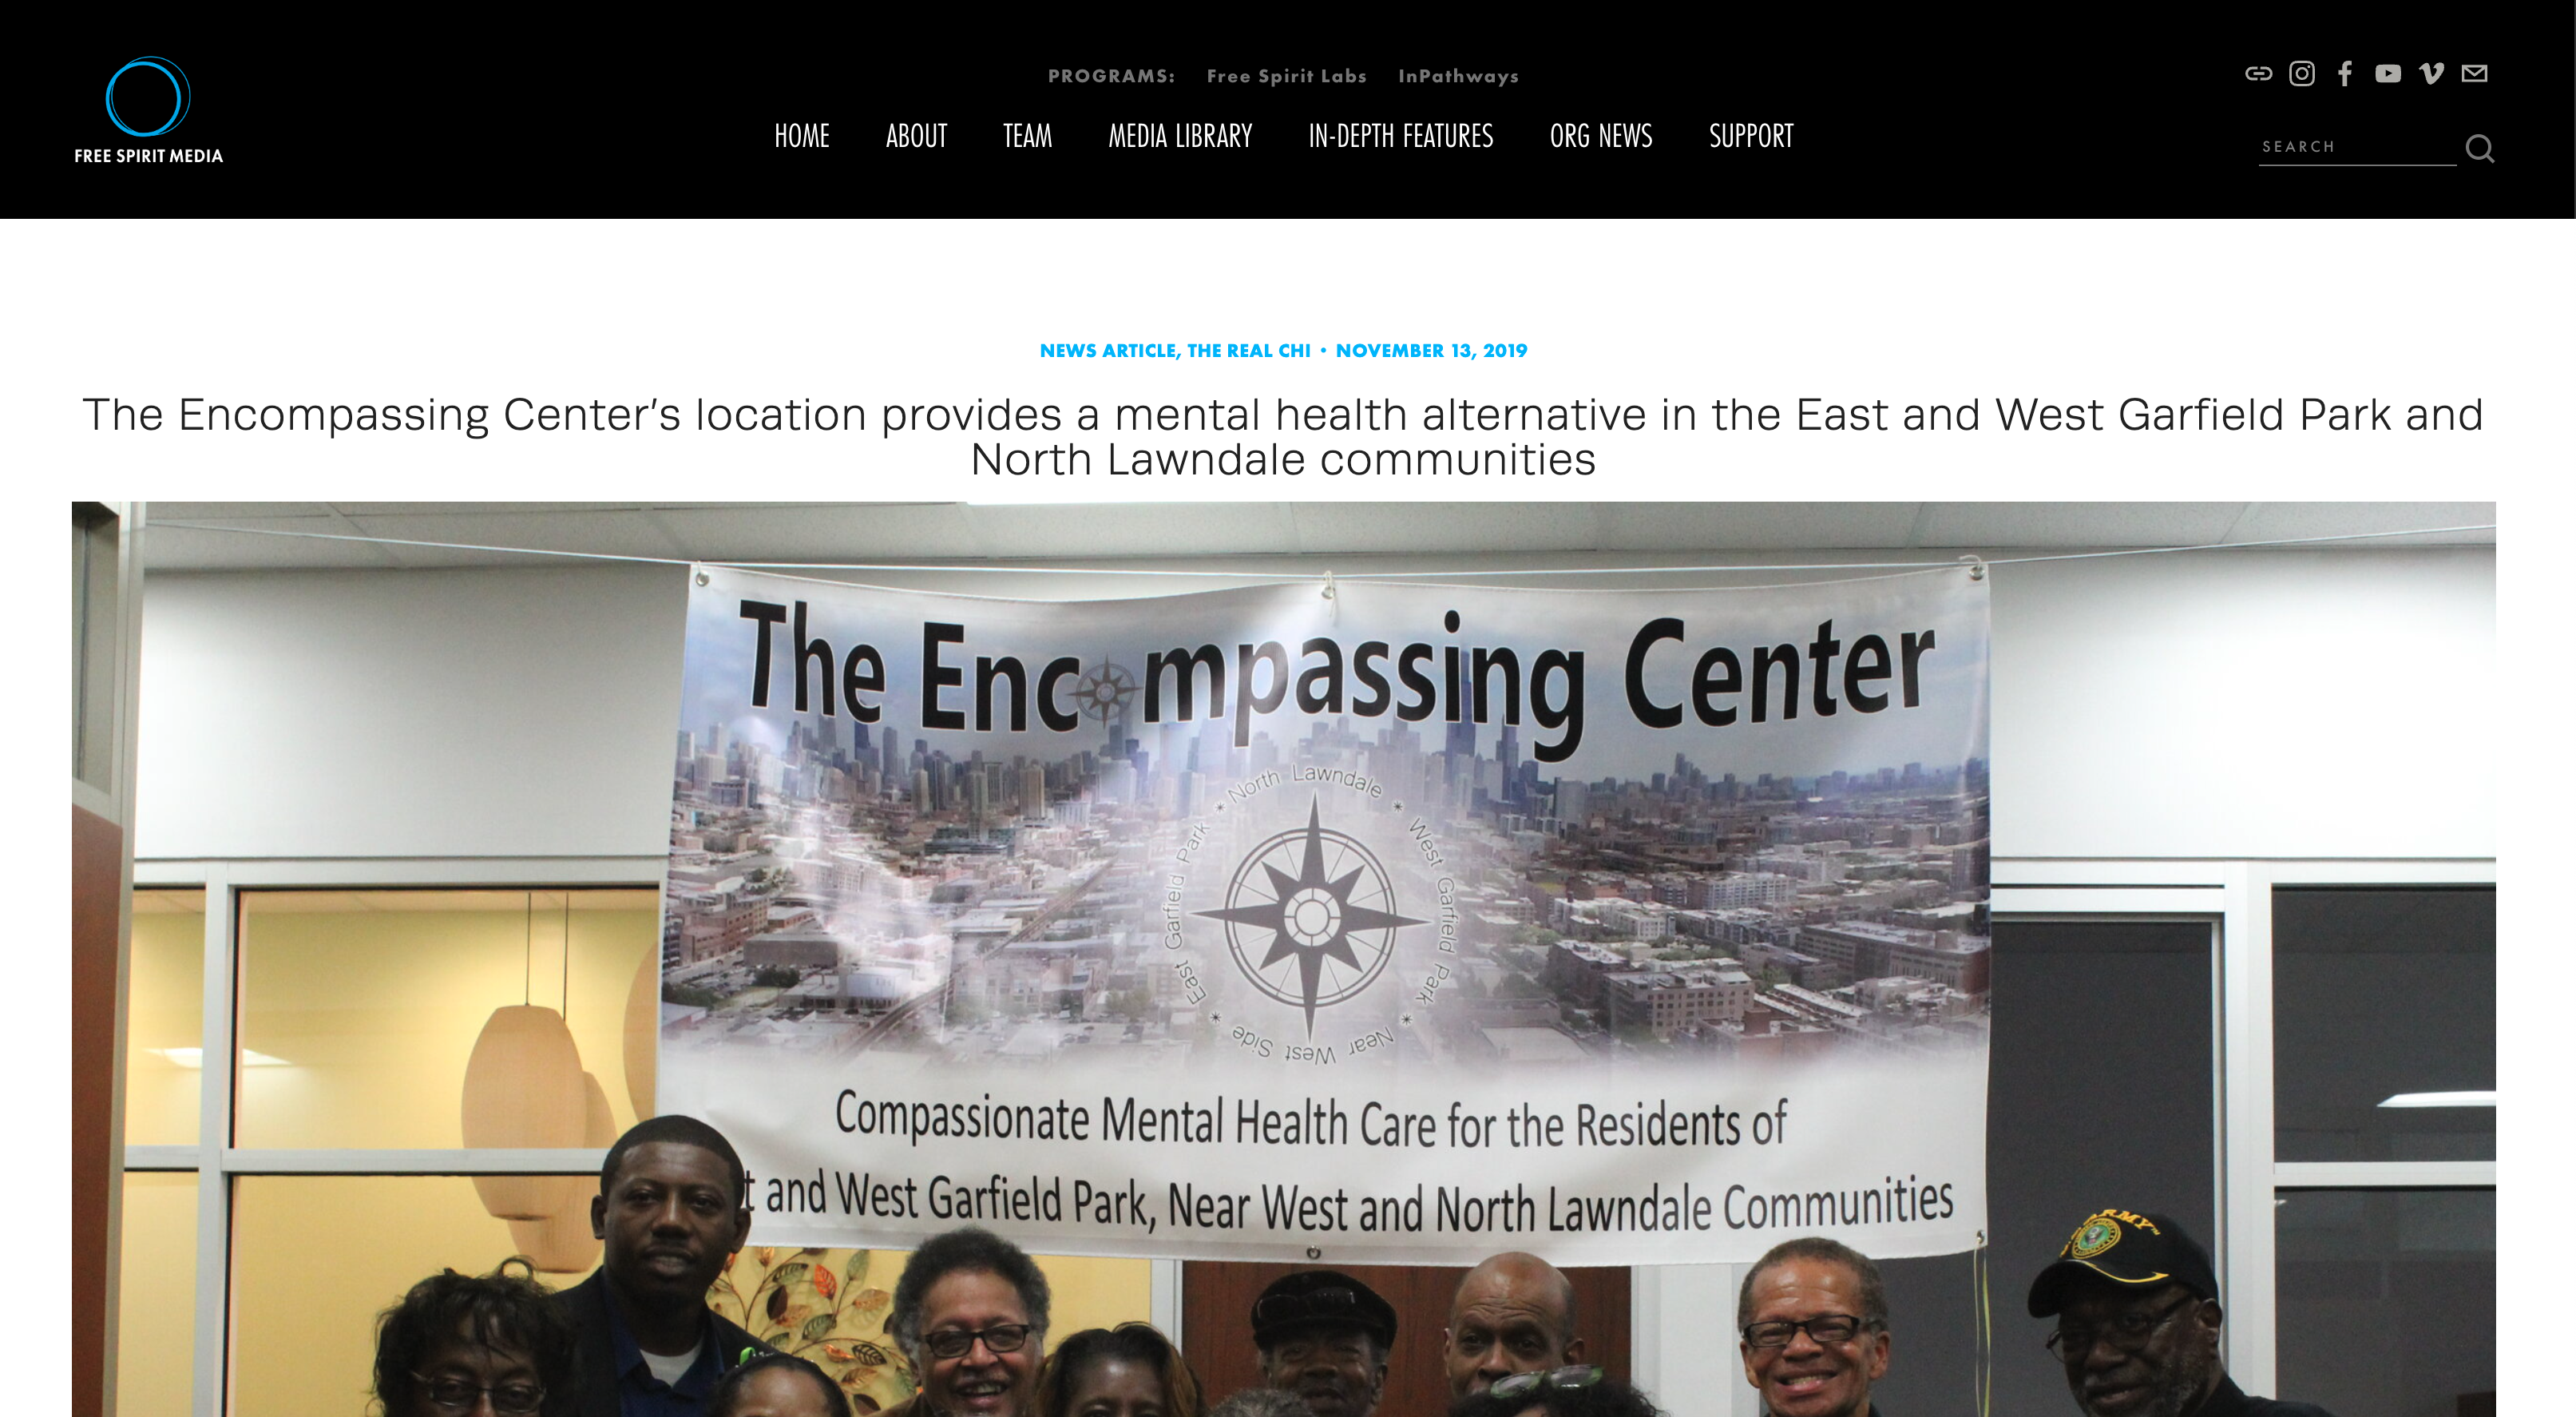 The Encompassing Center’s location provides a mental health alternative in the East and West Garfield Park and North Lawndale communities